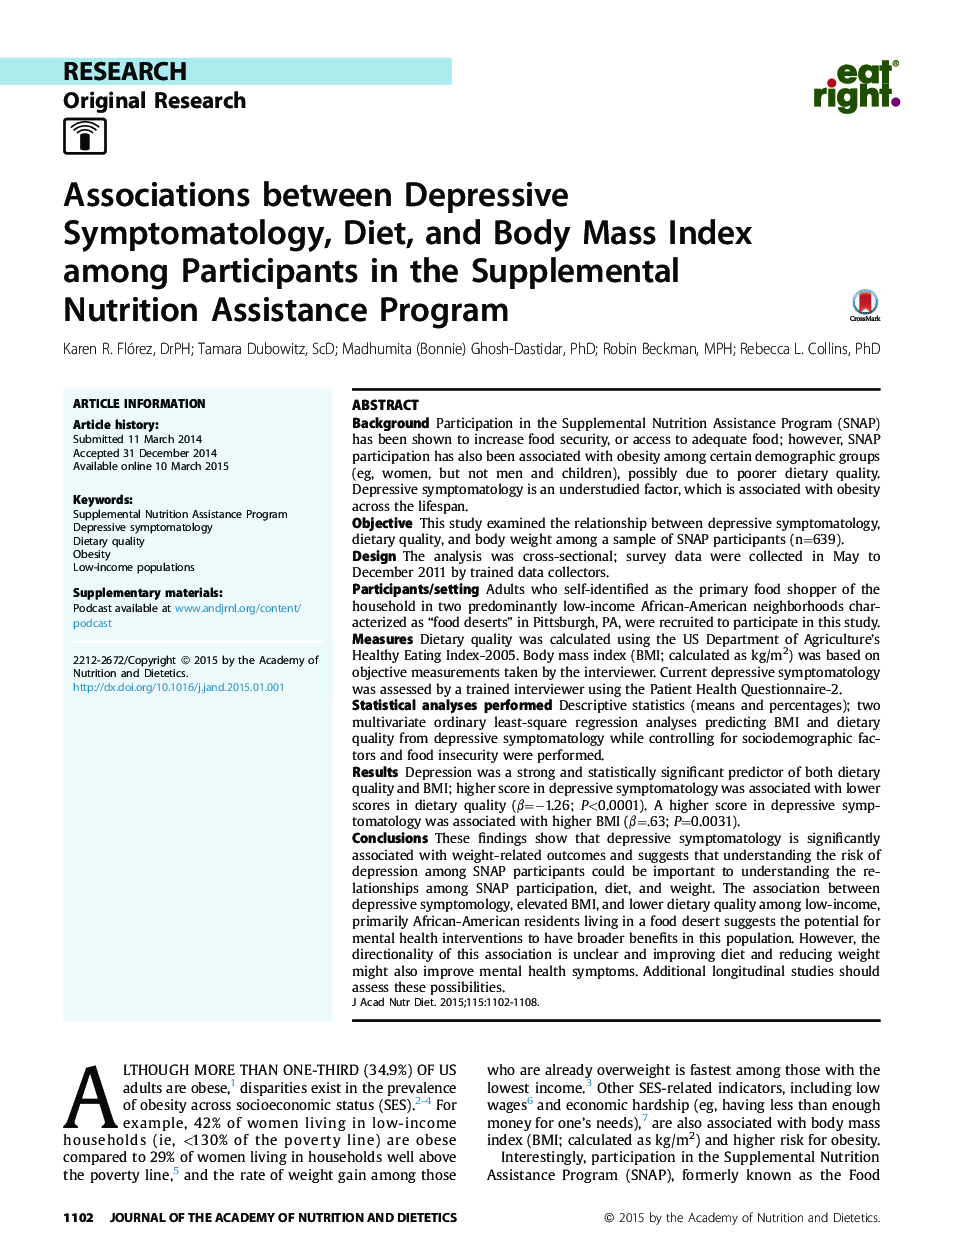 Associations between Depressive Symptomatology, Diet, and Body Mass Index among Participants in the Supplemental Nutrition Assistance Program 